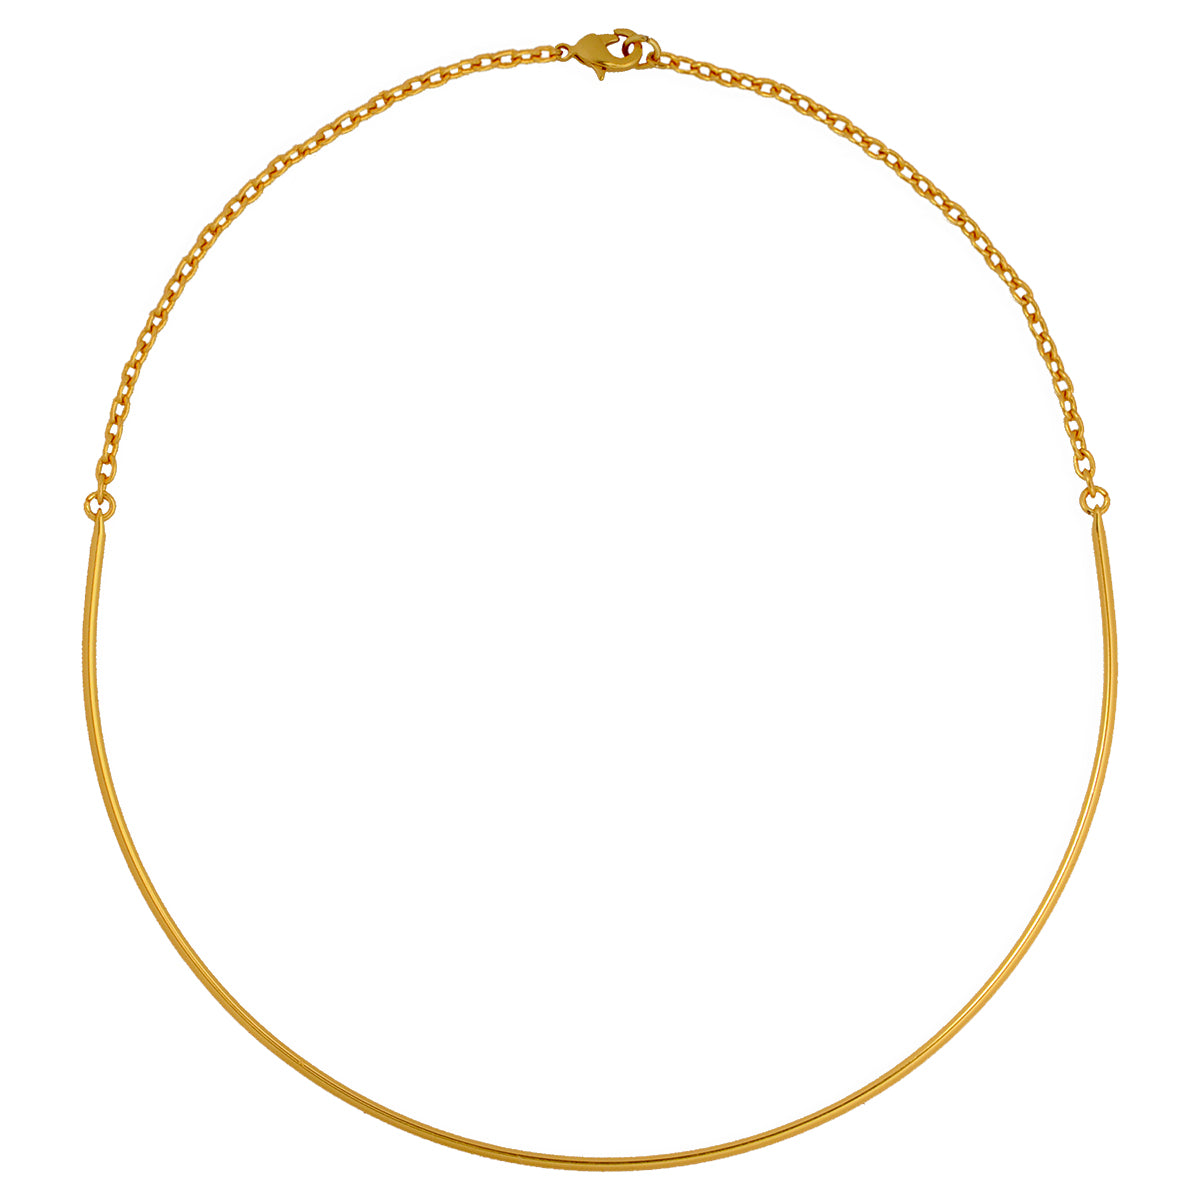 24k GP 2mm Semi-Omega Chain 17 inch Length Necklace by Across The Puddle